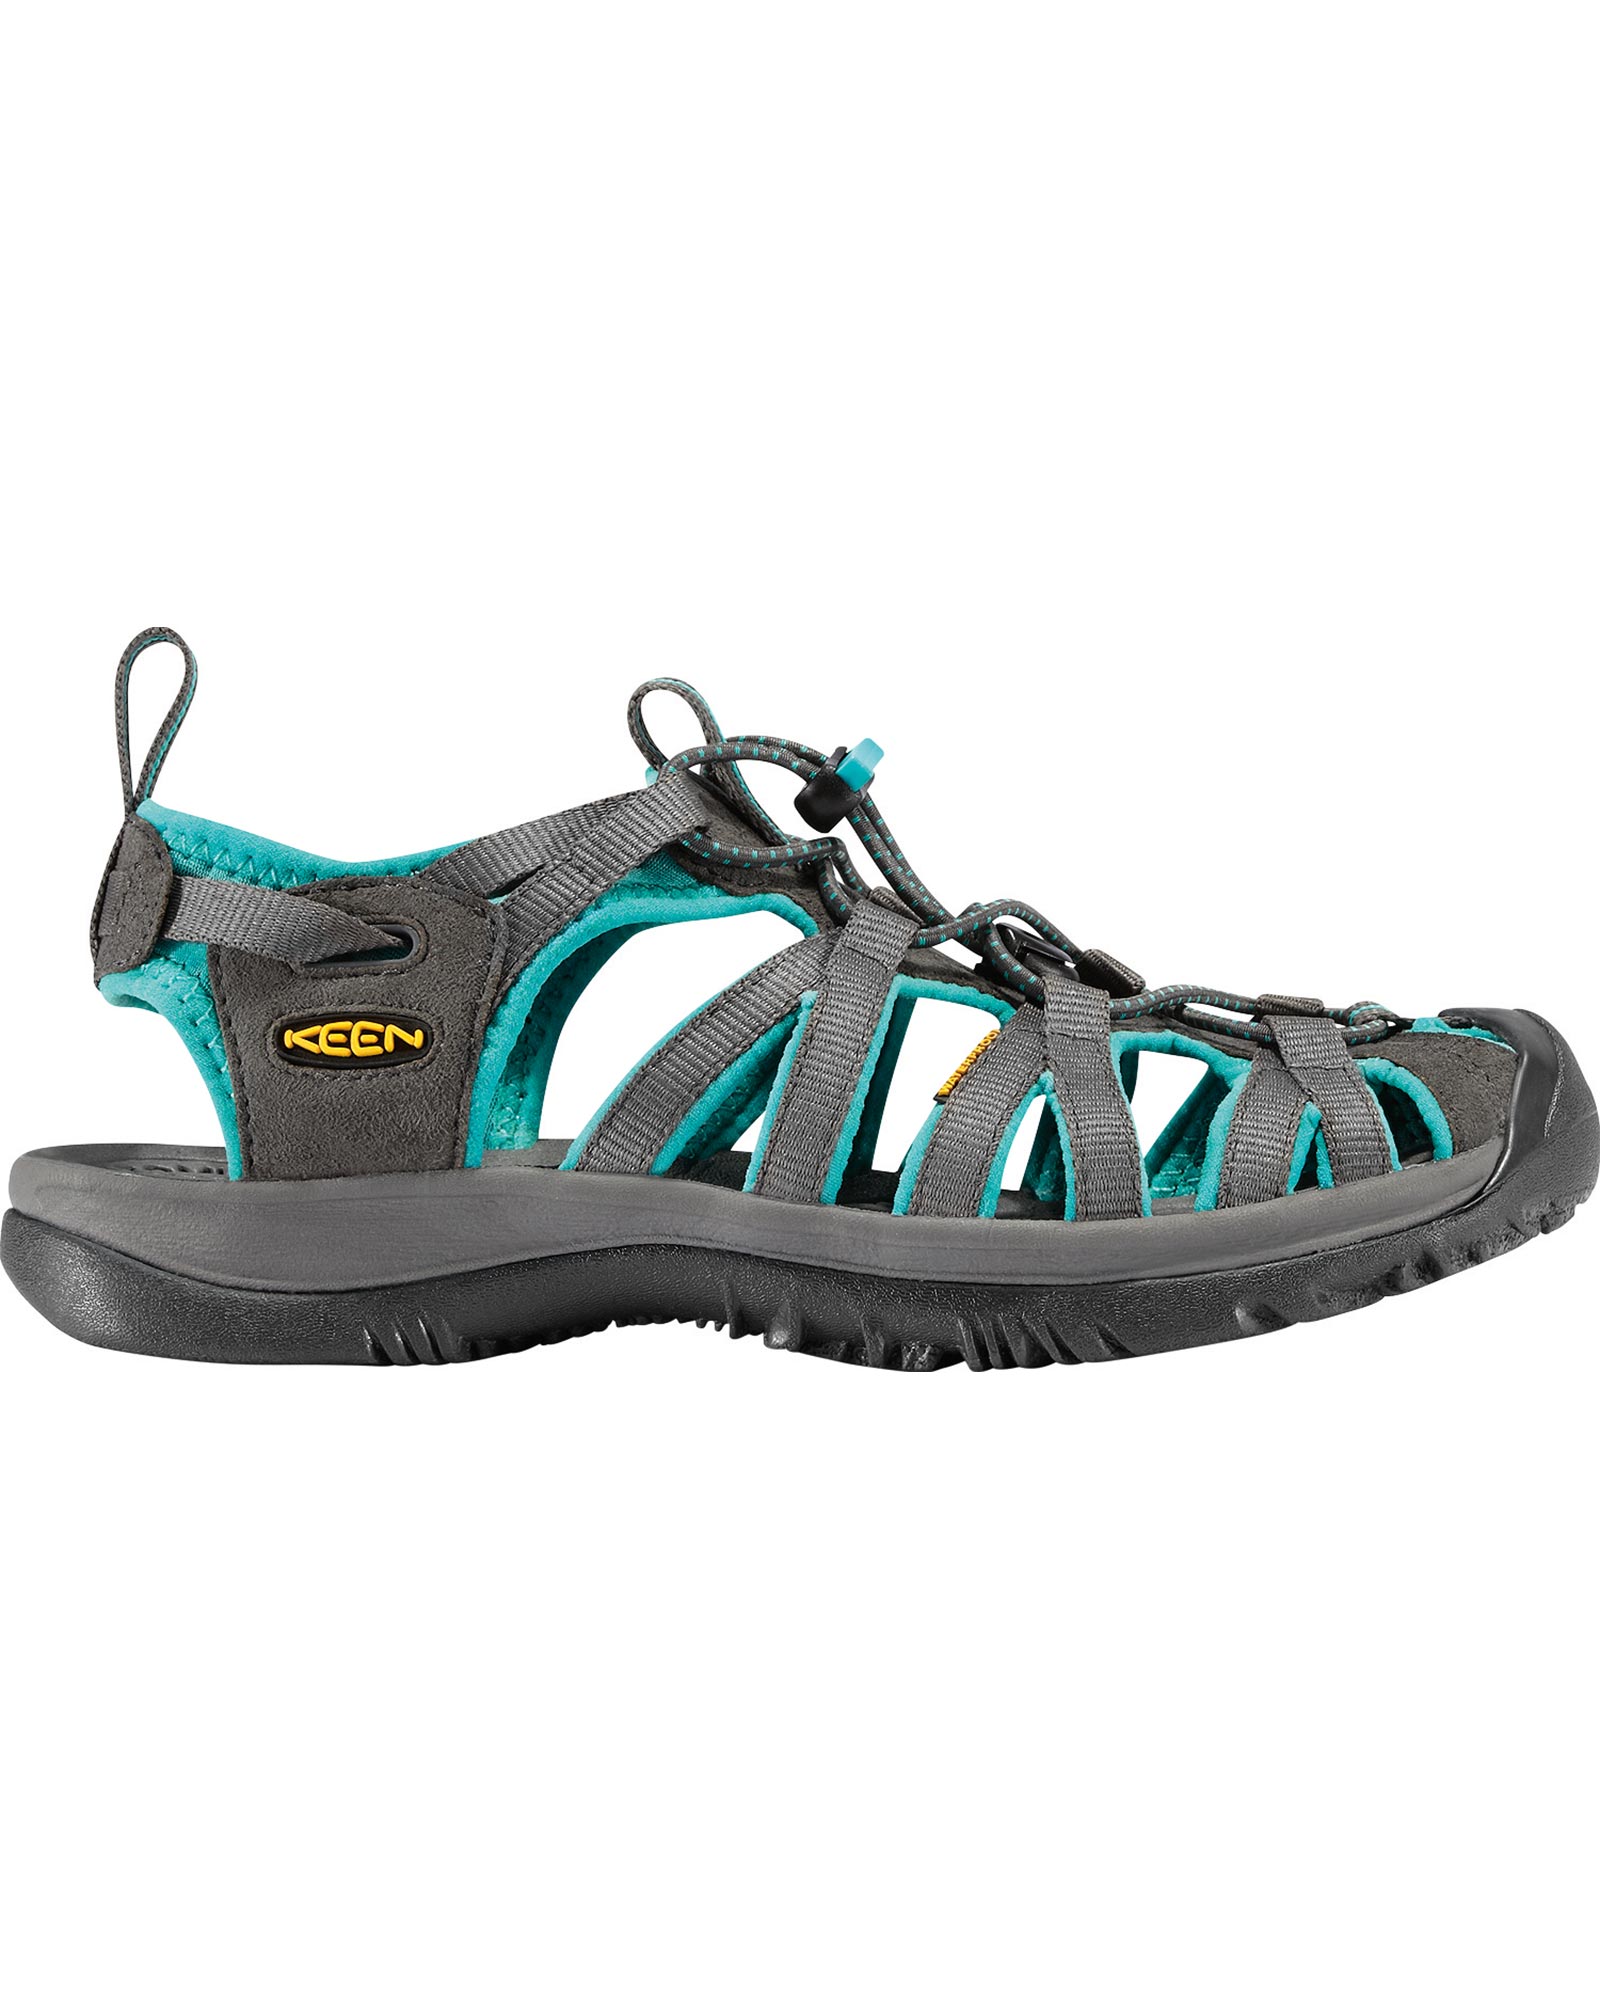 Product image of Keen Whisper Women's Sandals